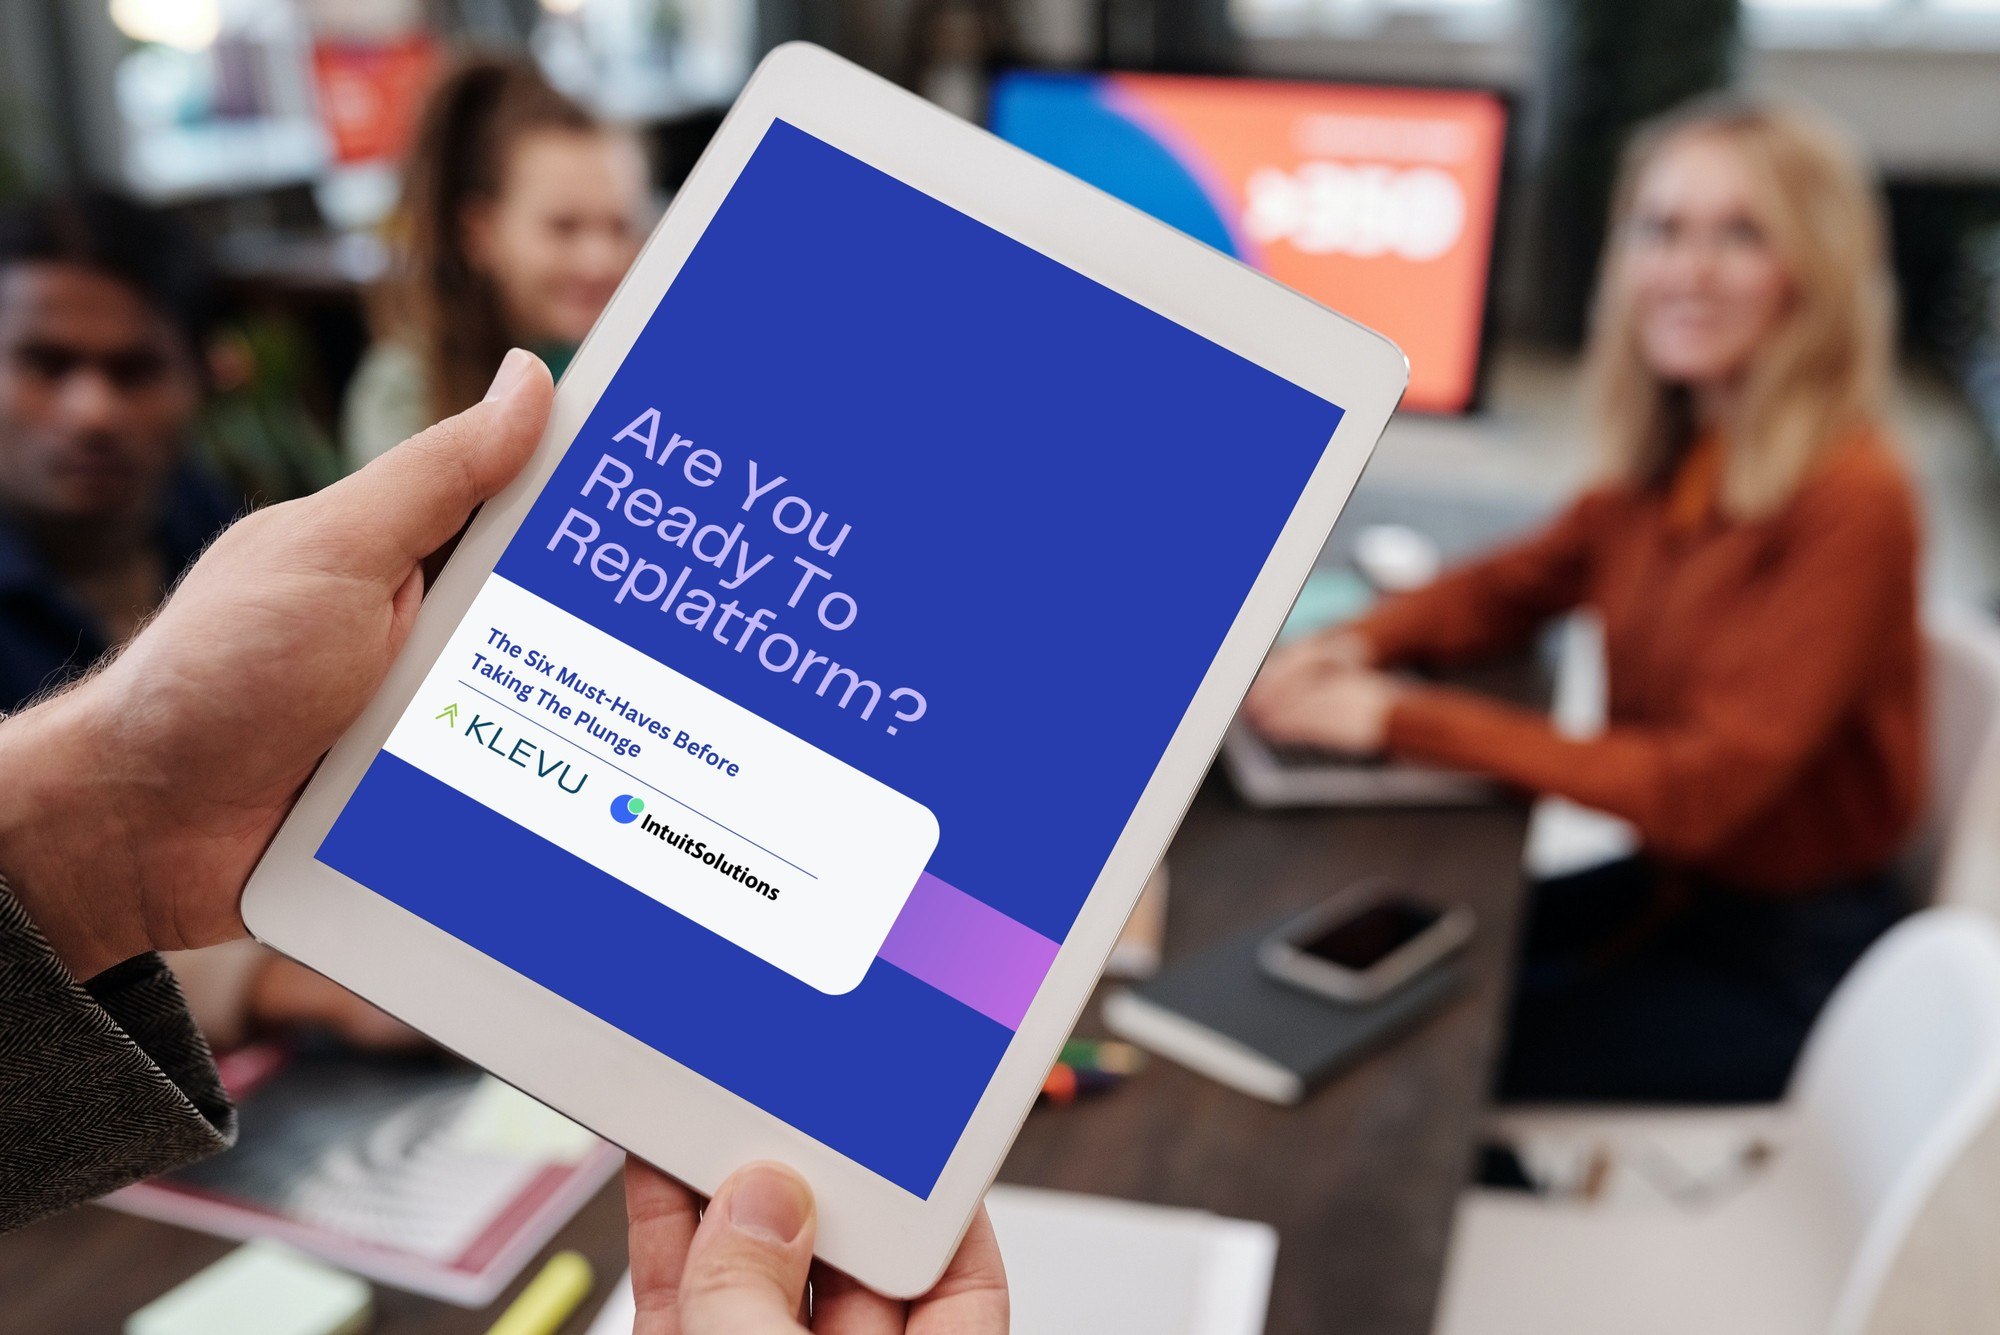 Mockup of person holding "Are You Ready to Replatform" Ebook on Tablet